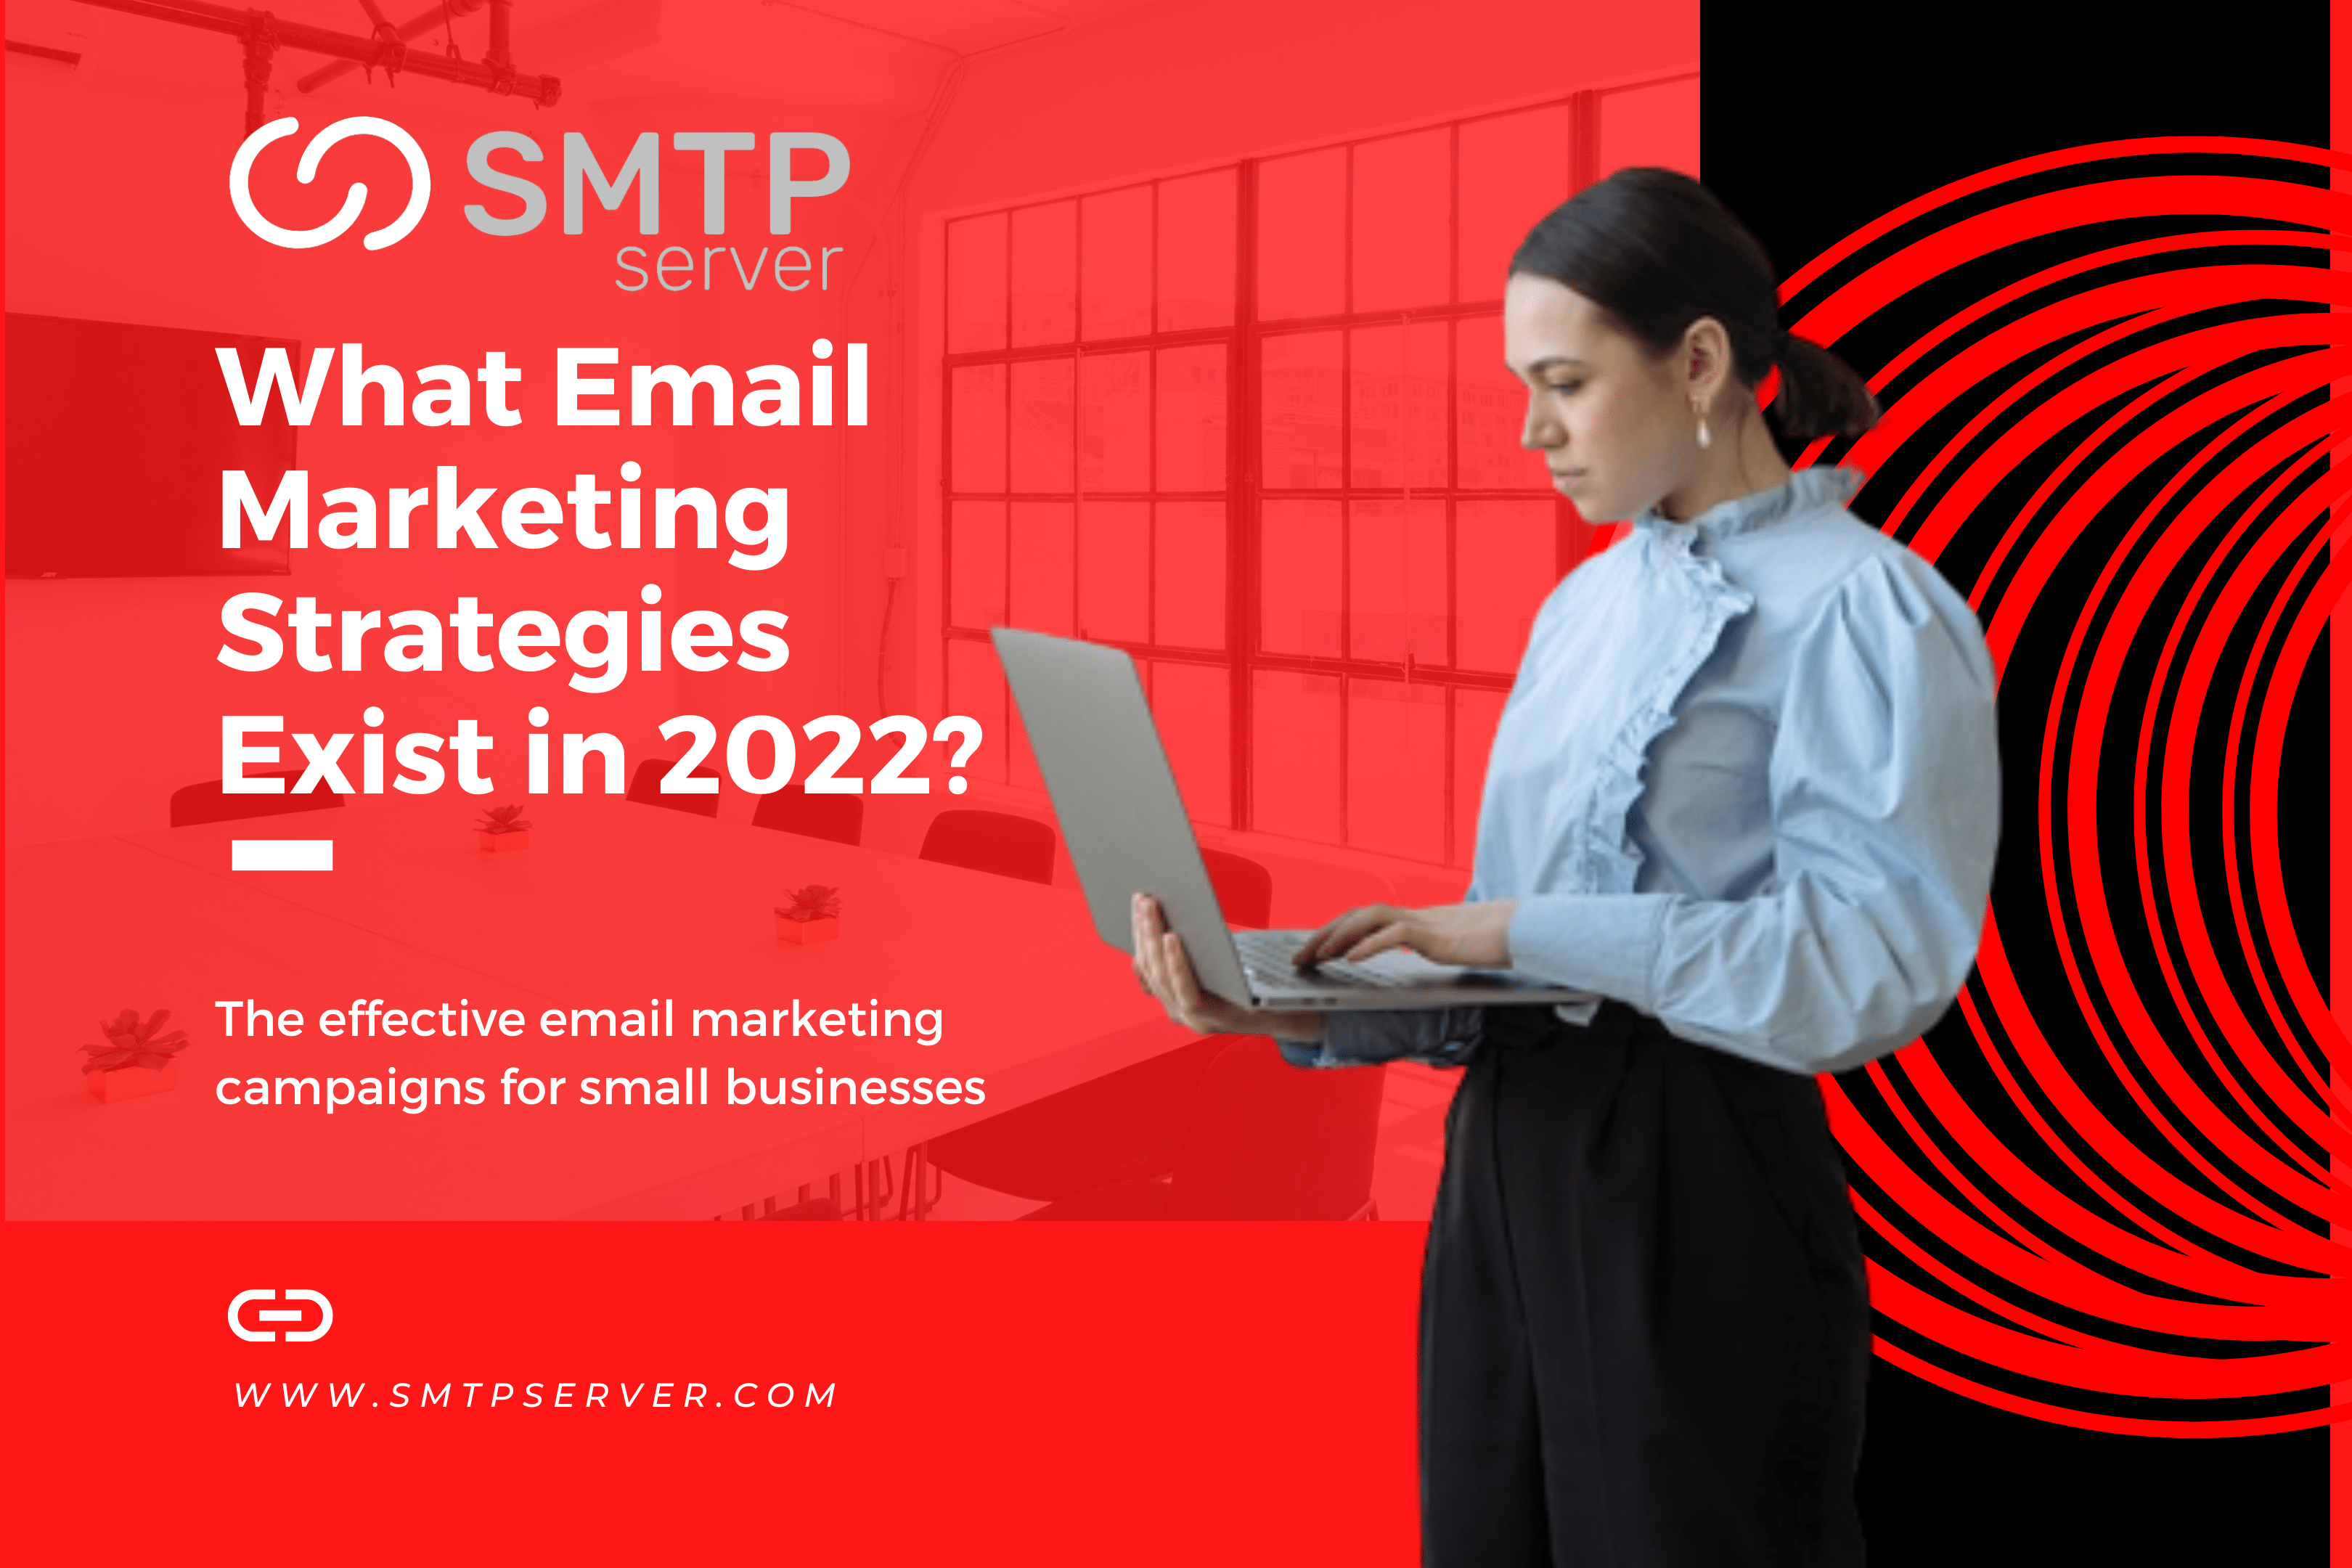 What Email Marketing Strategies Exist in 2022?